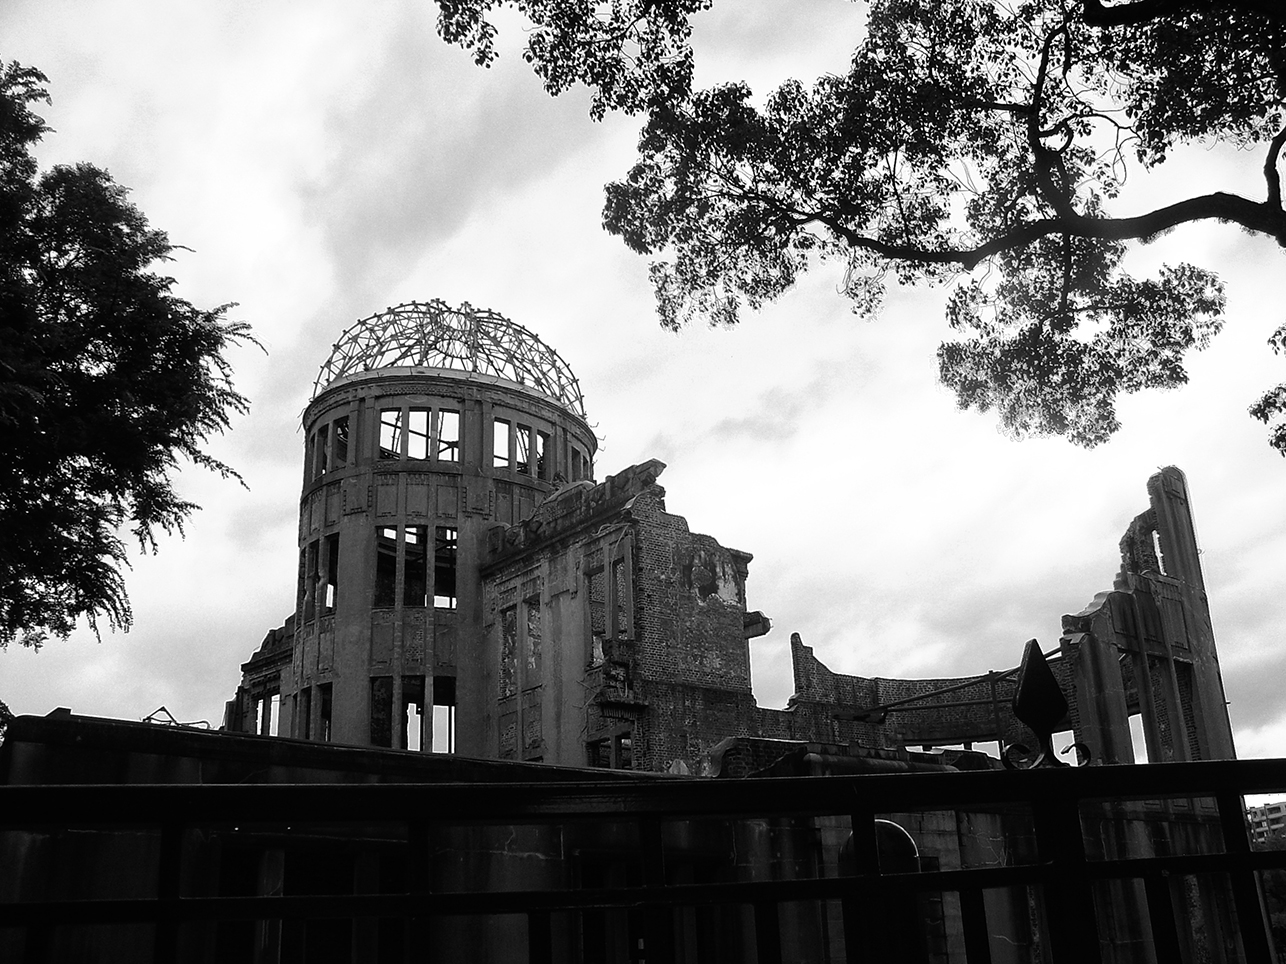 Genbaku Dome (原爆ドーム) - The leftovers after the nuclear strike.